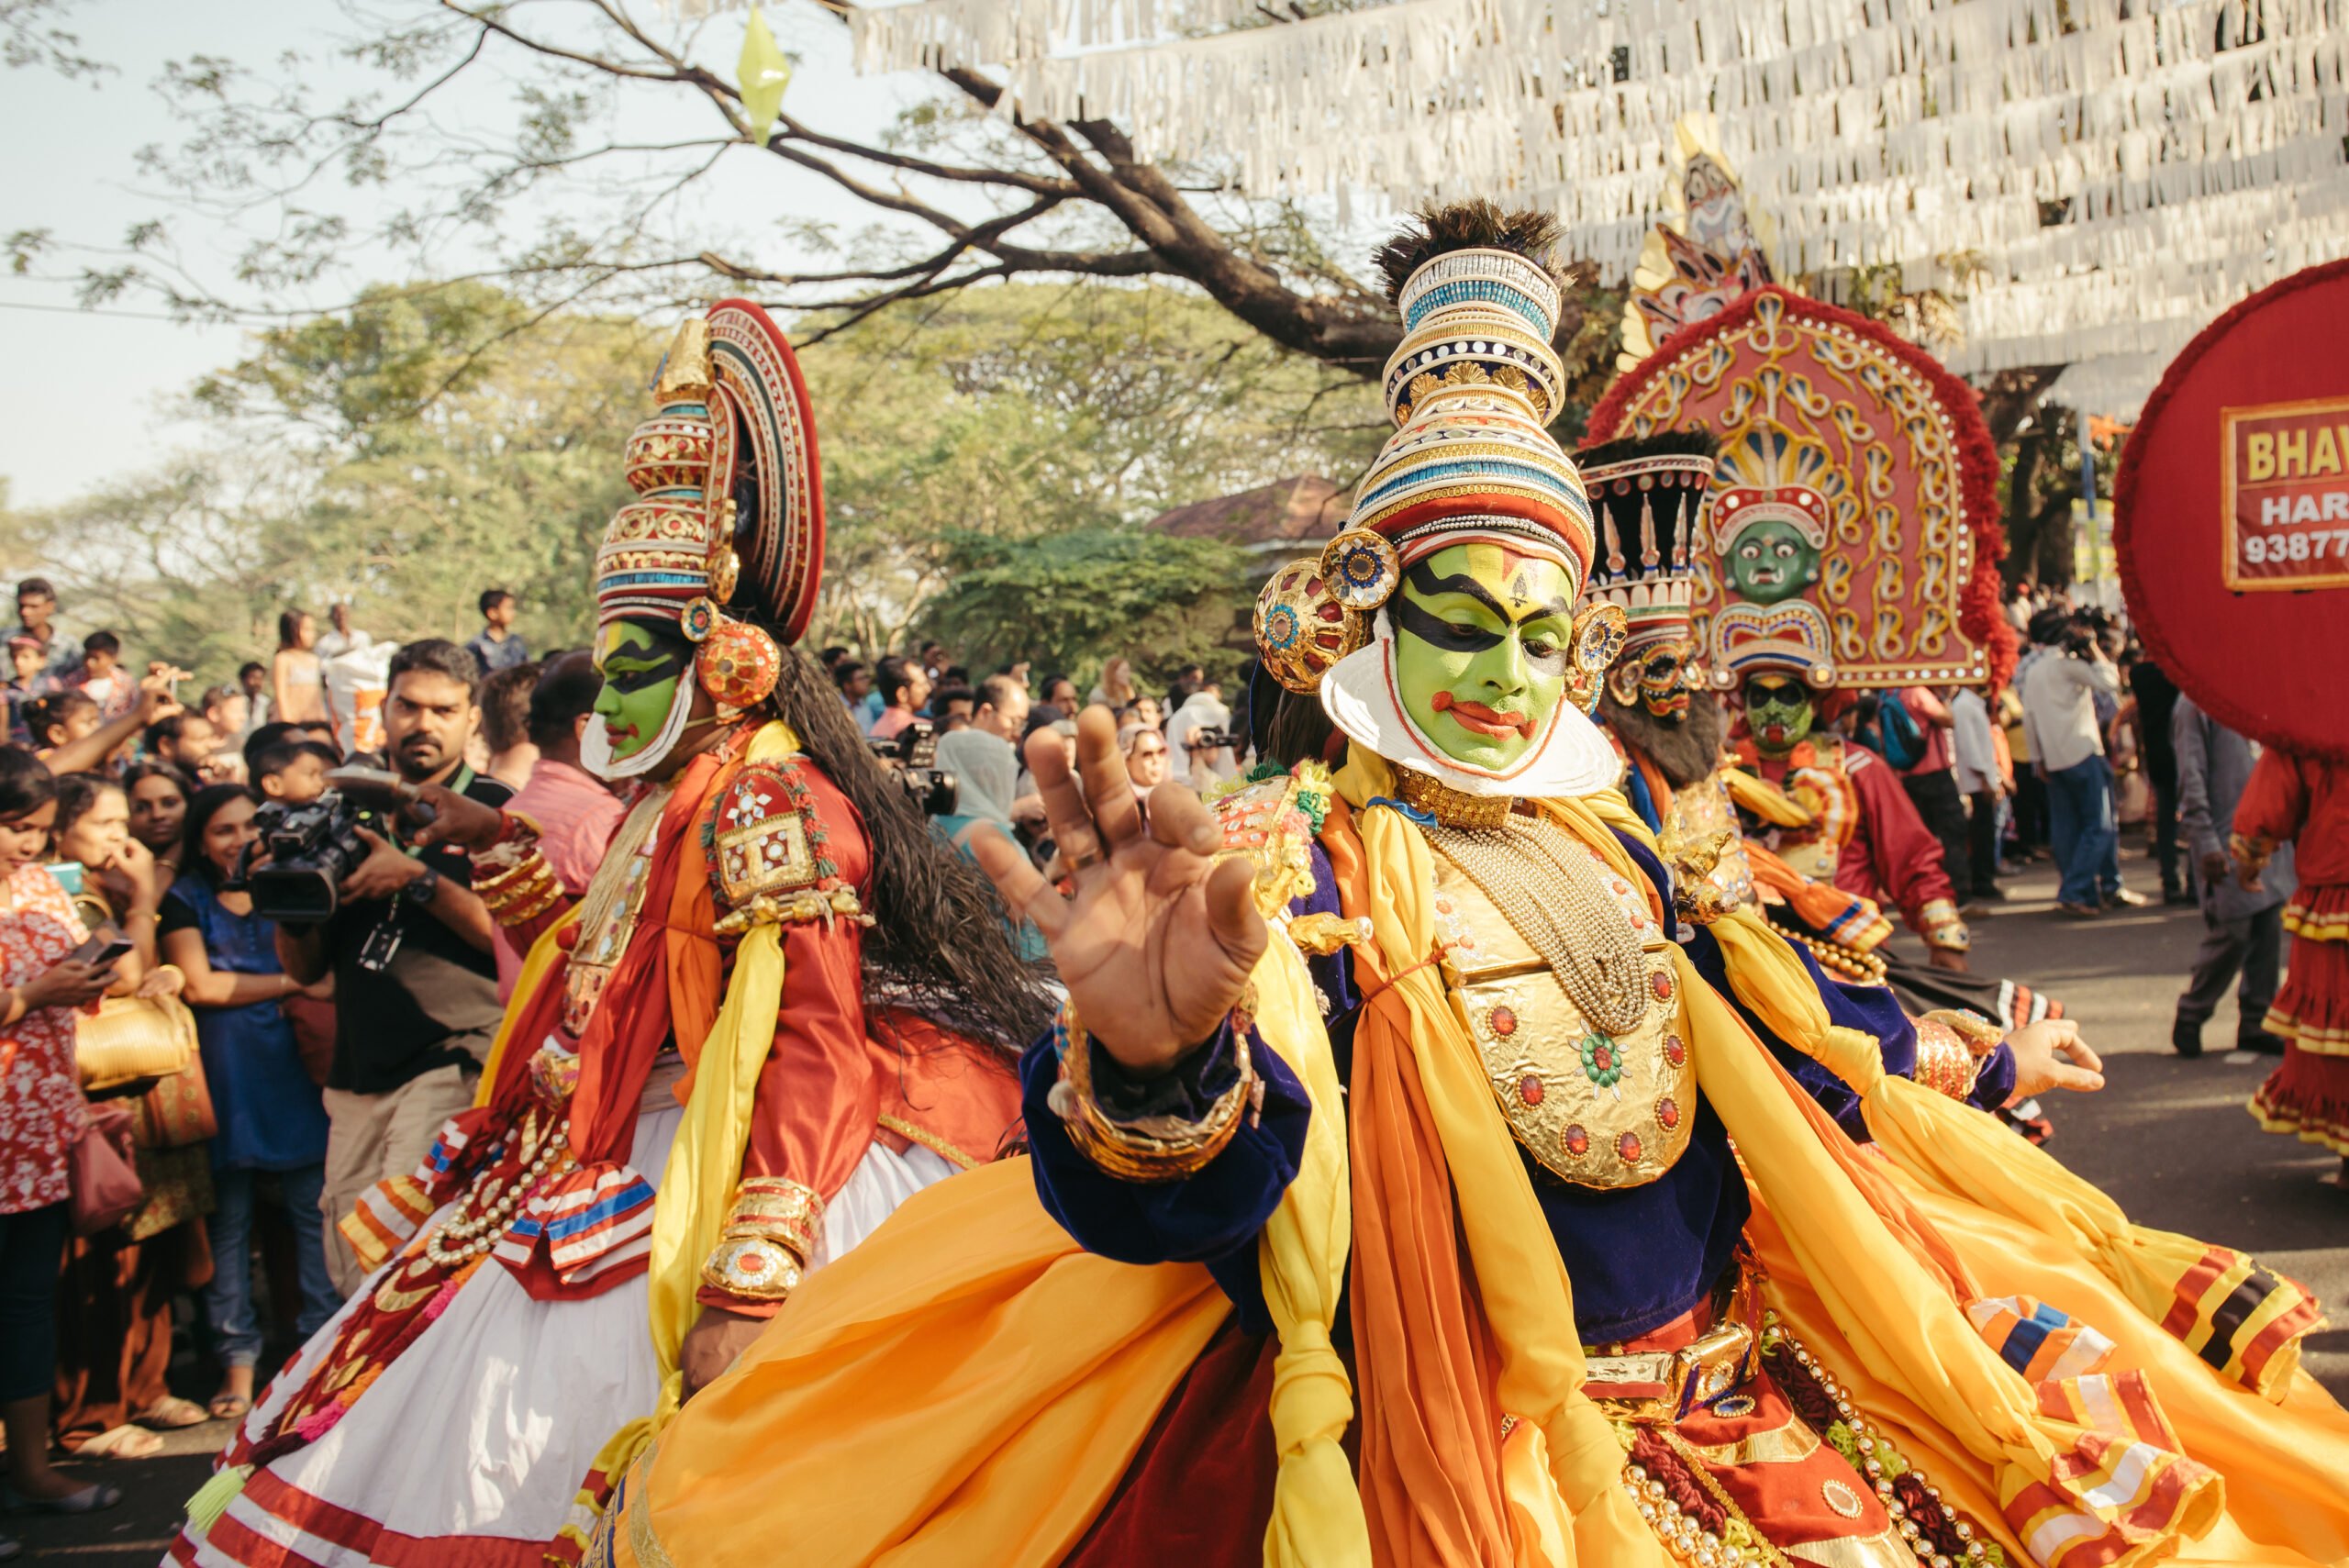 Witness A Kathakali Dance Performance In Our 3 Day Wildlife And Culture Tour Of Thekkady From Kochi